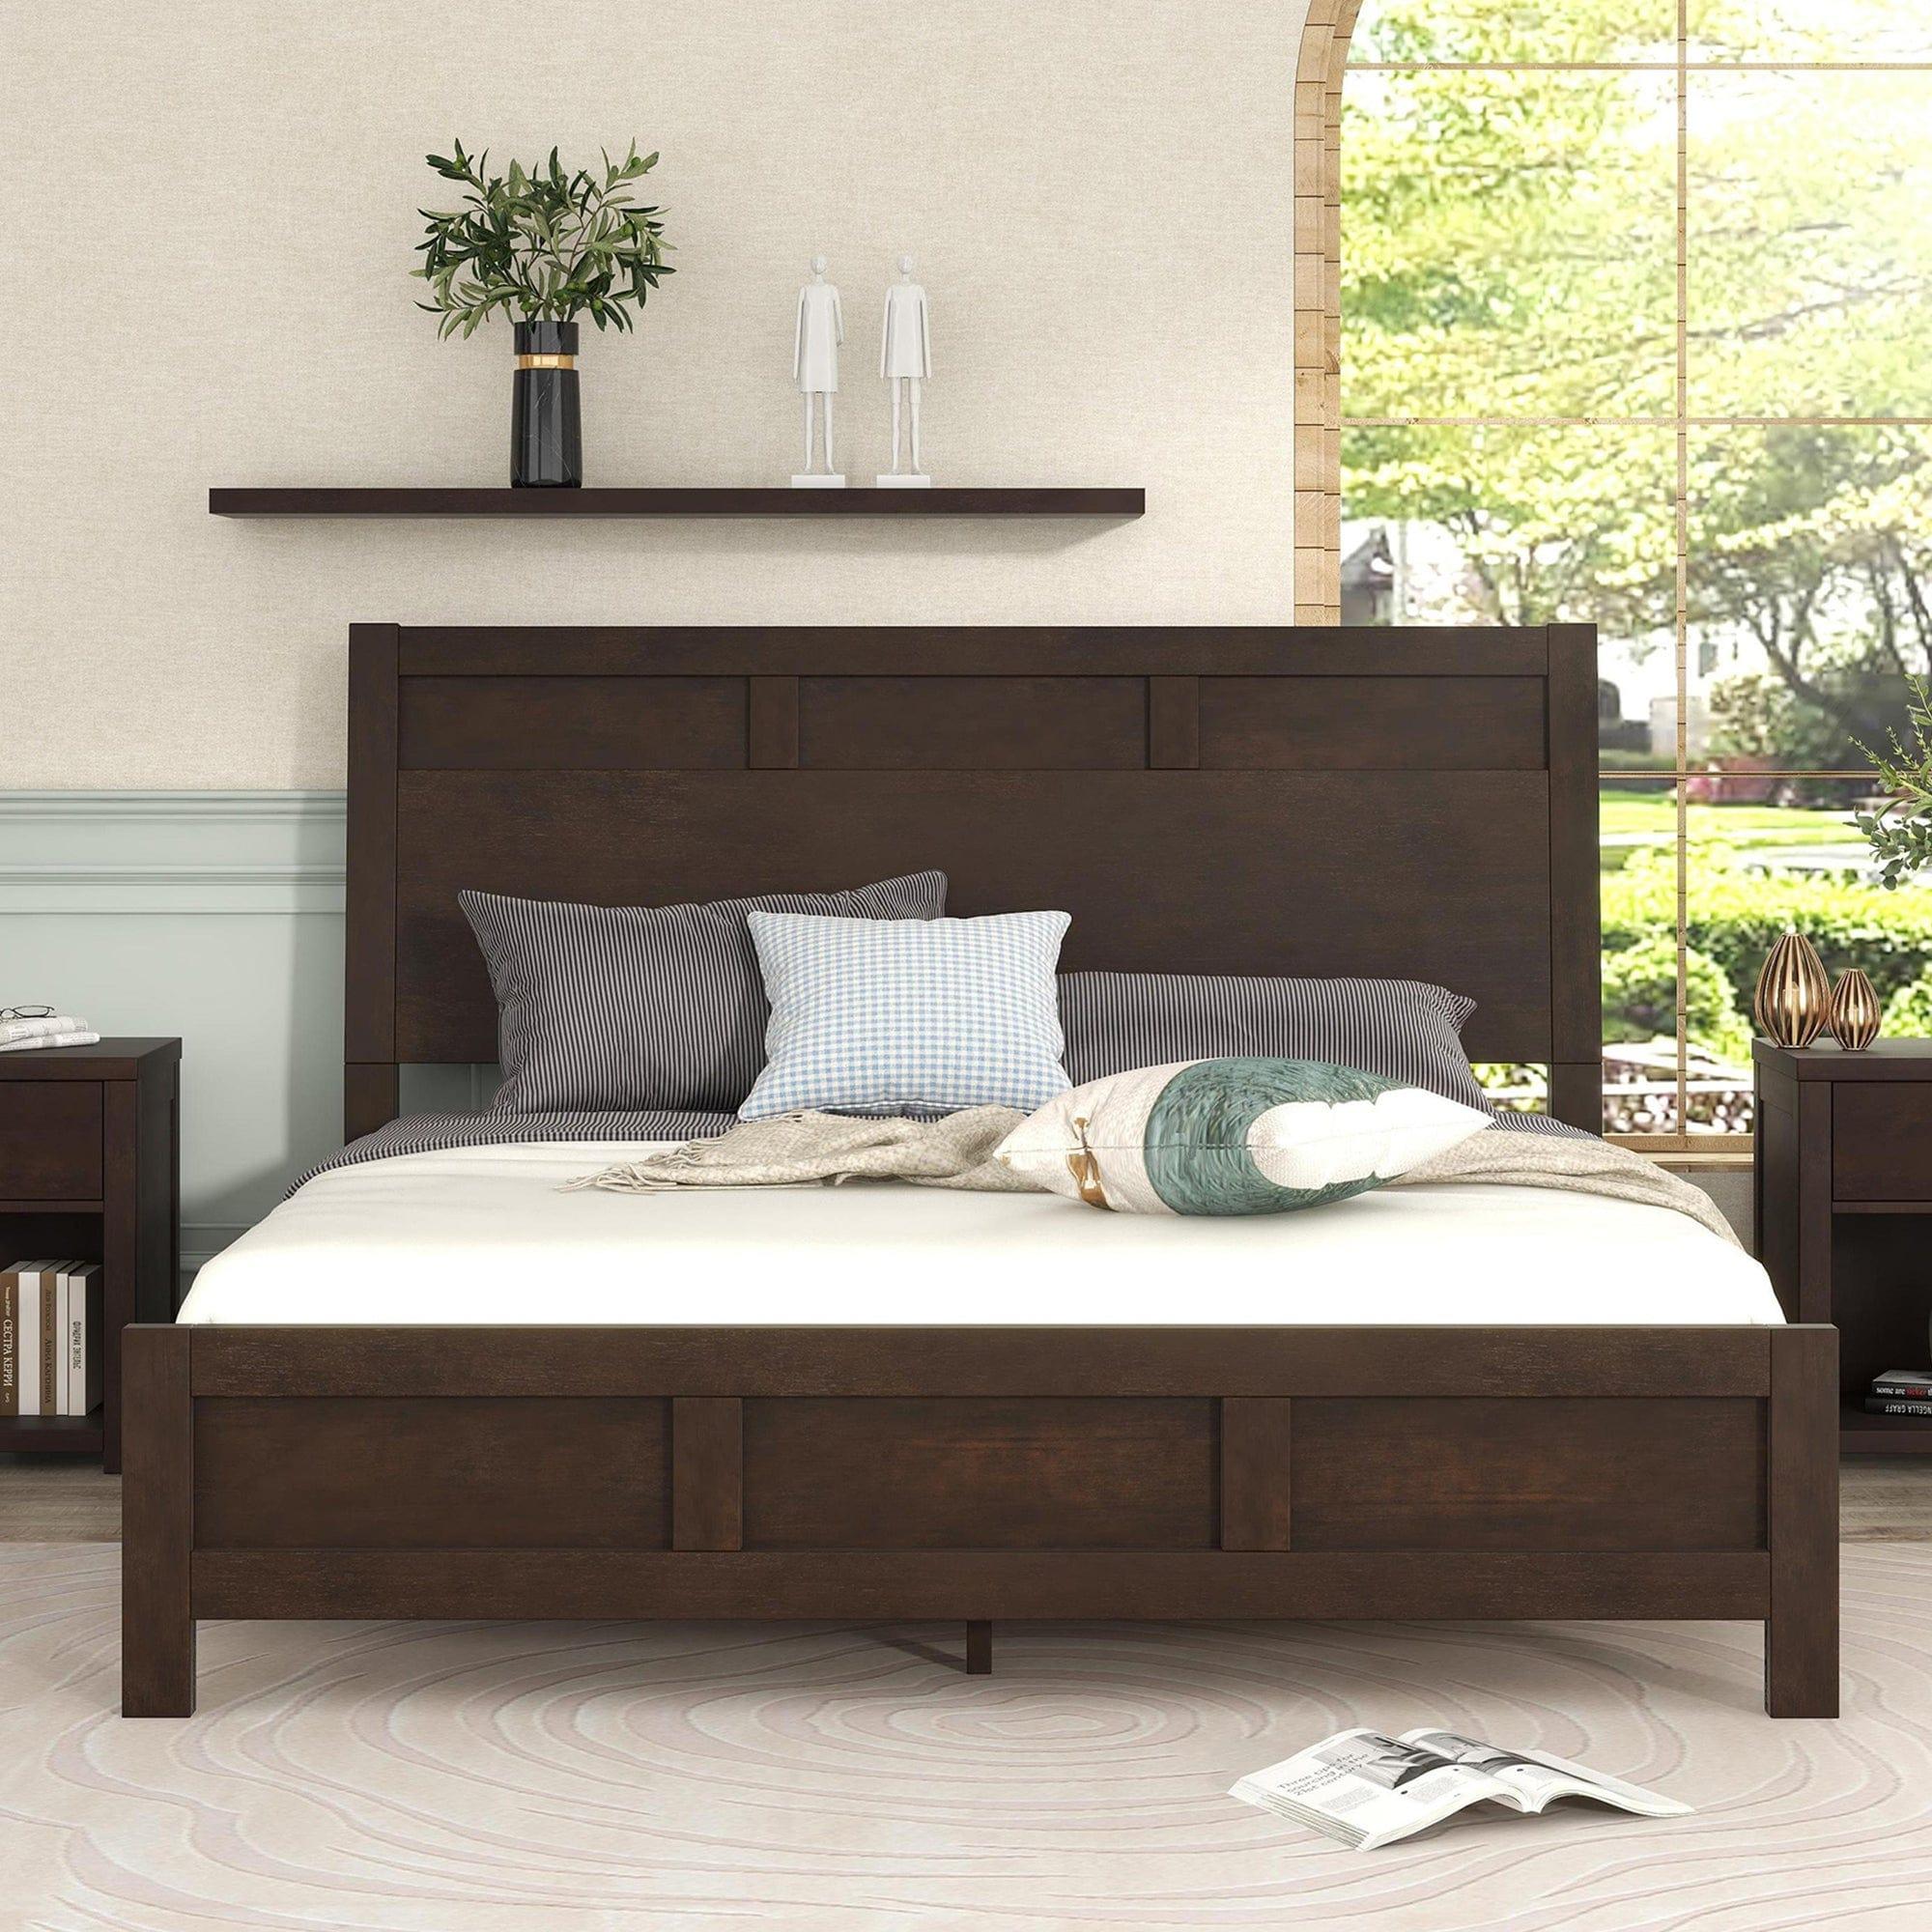 Shop Classic Rich Brown 6 Pieces King Bedroom Set ( King Bed + Nightstand*2+ Dresser + Chest + Mirror) Mademoiselle Home Decor